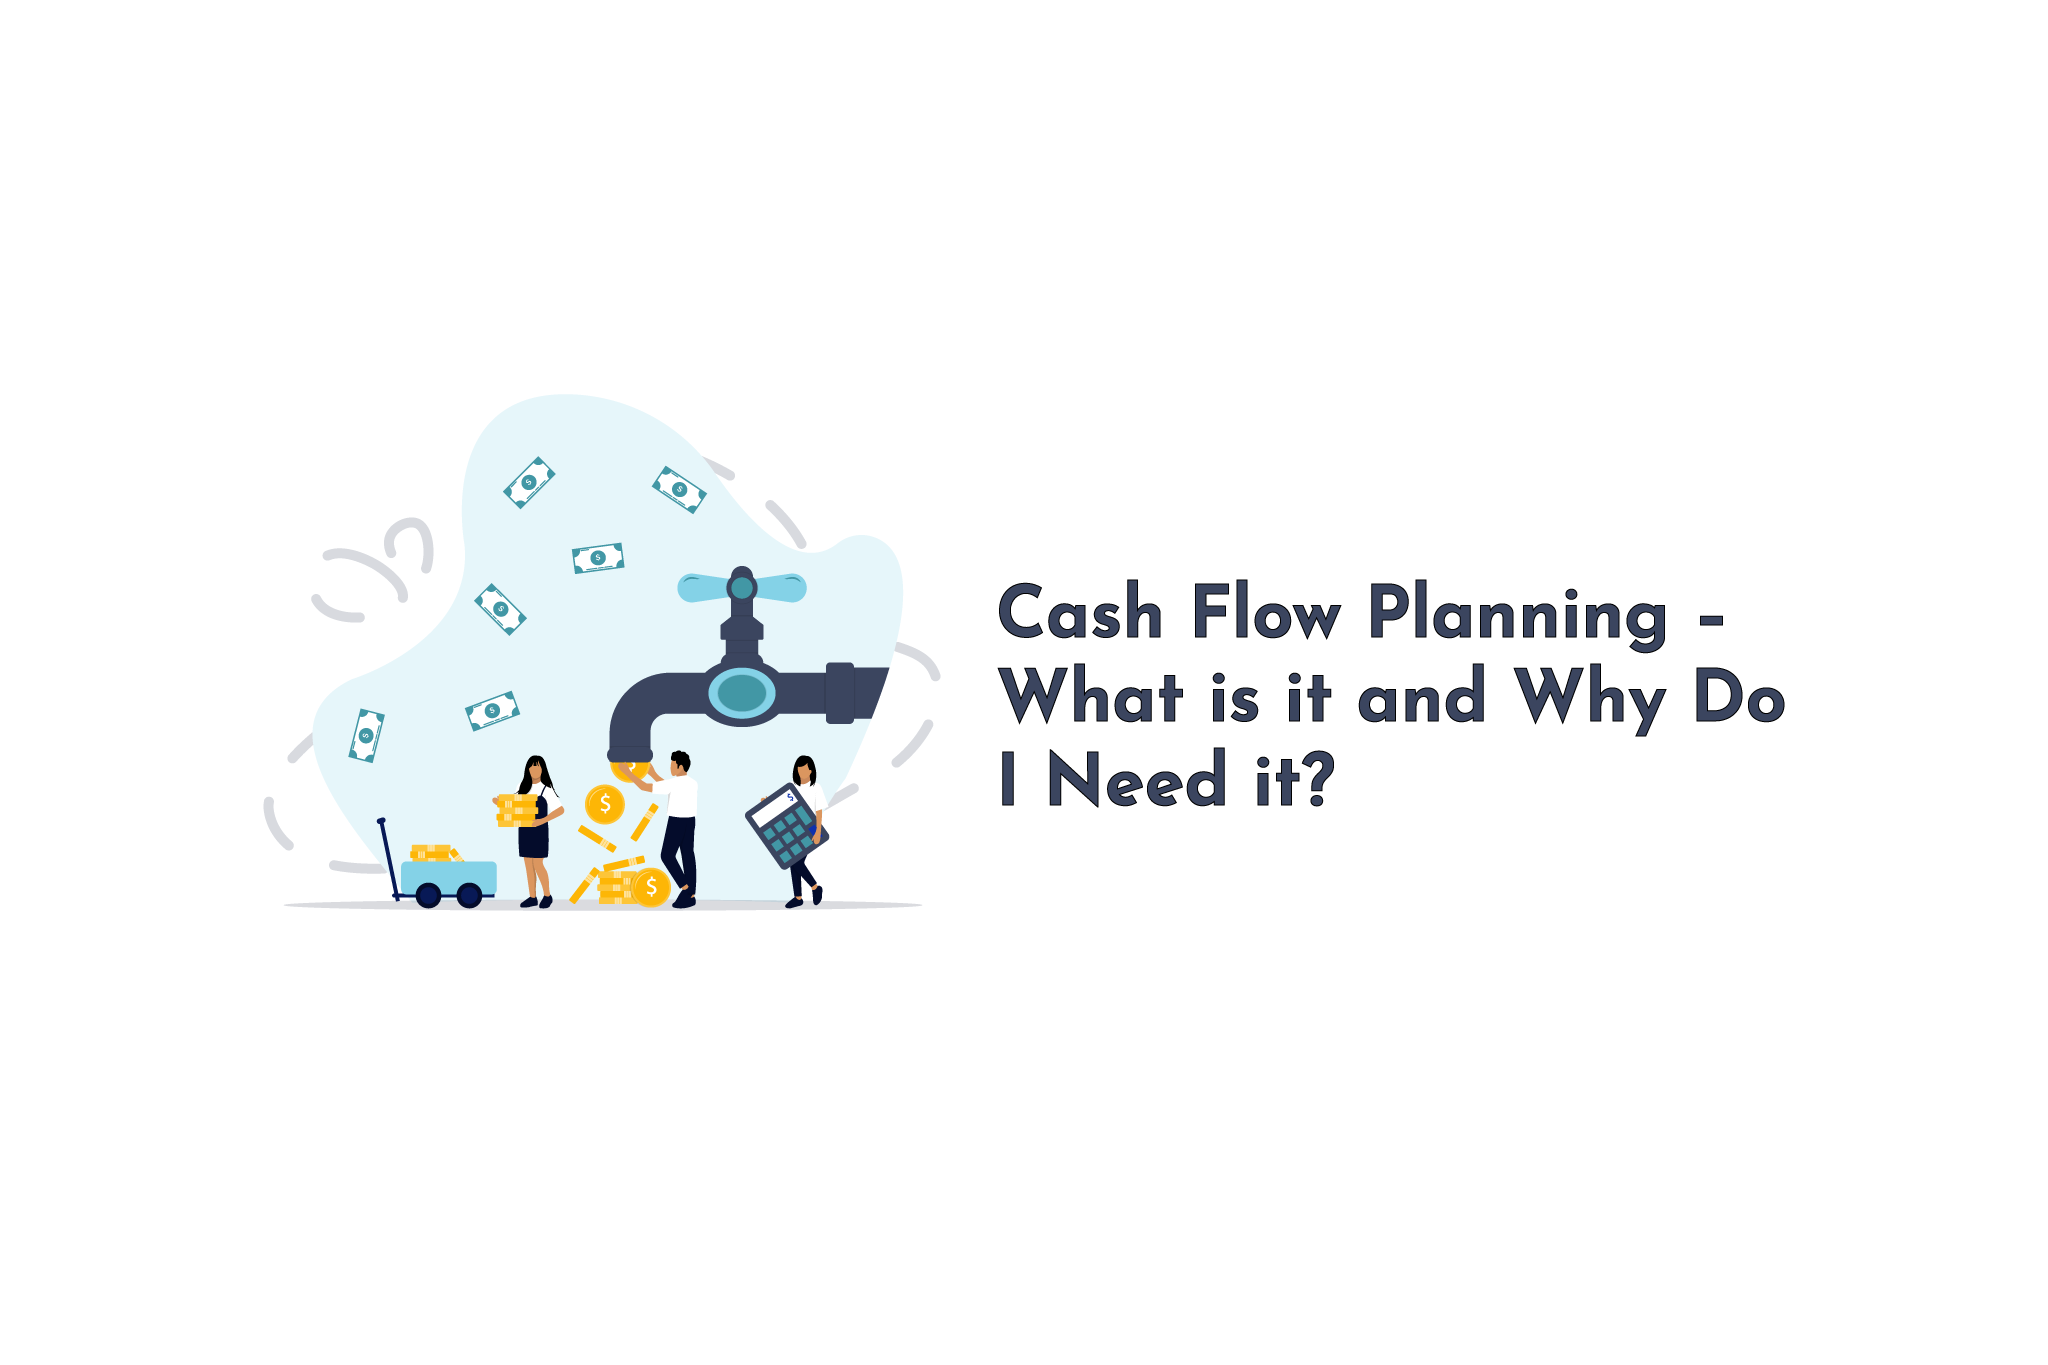 What is Cash Flow Planning